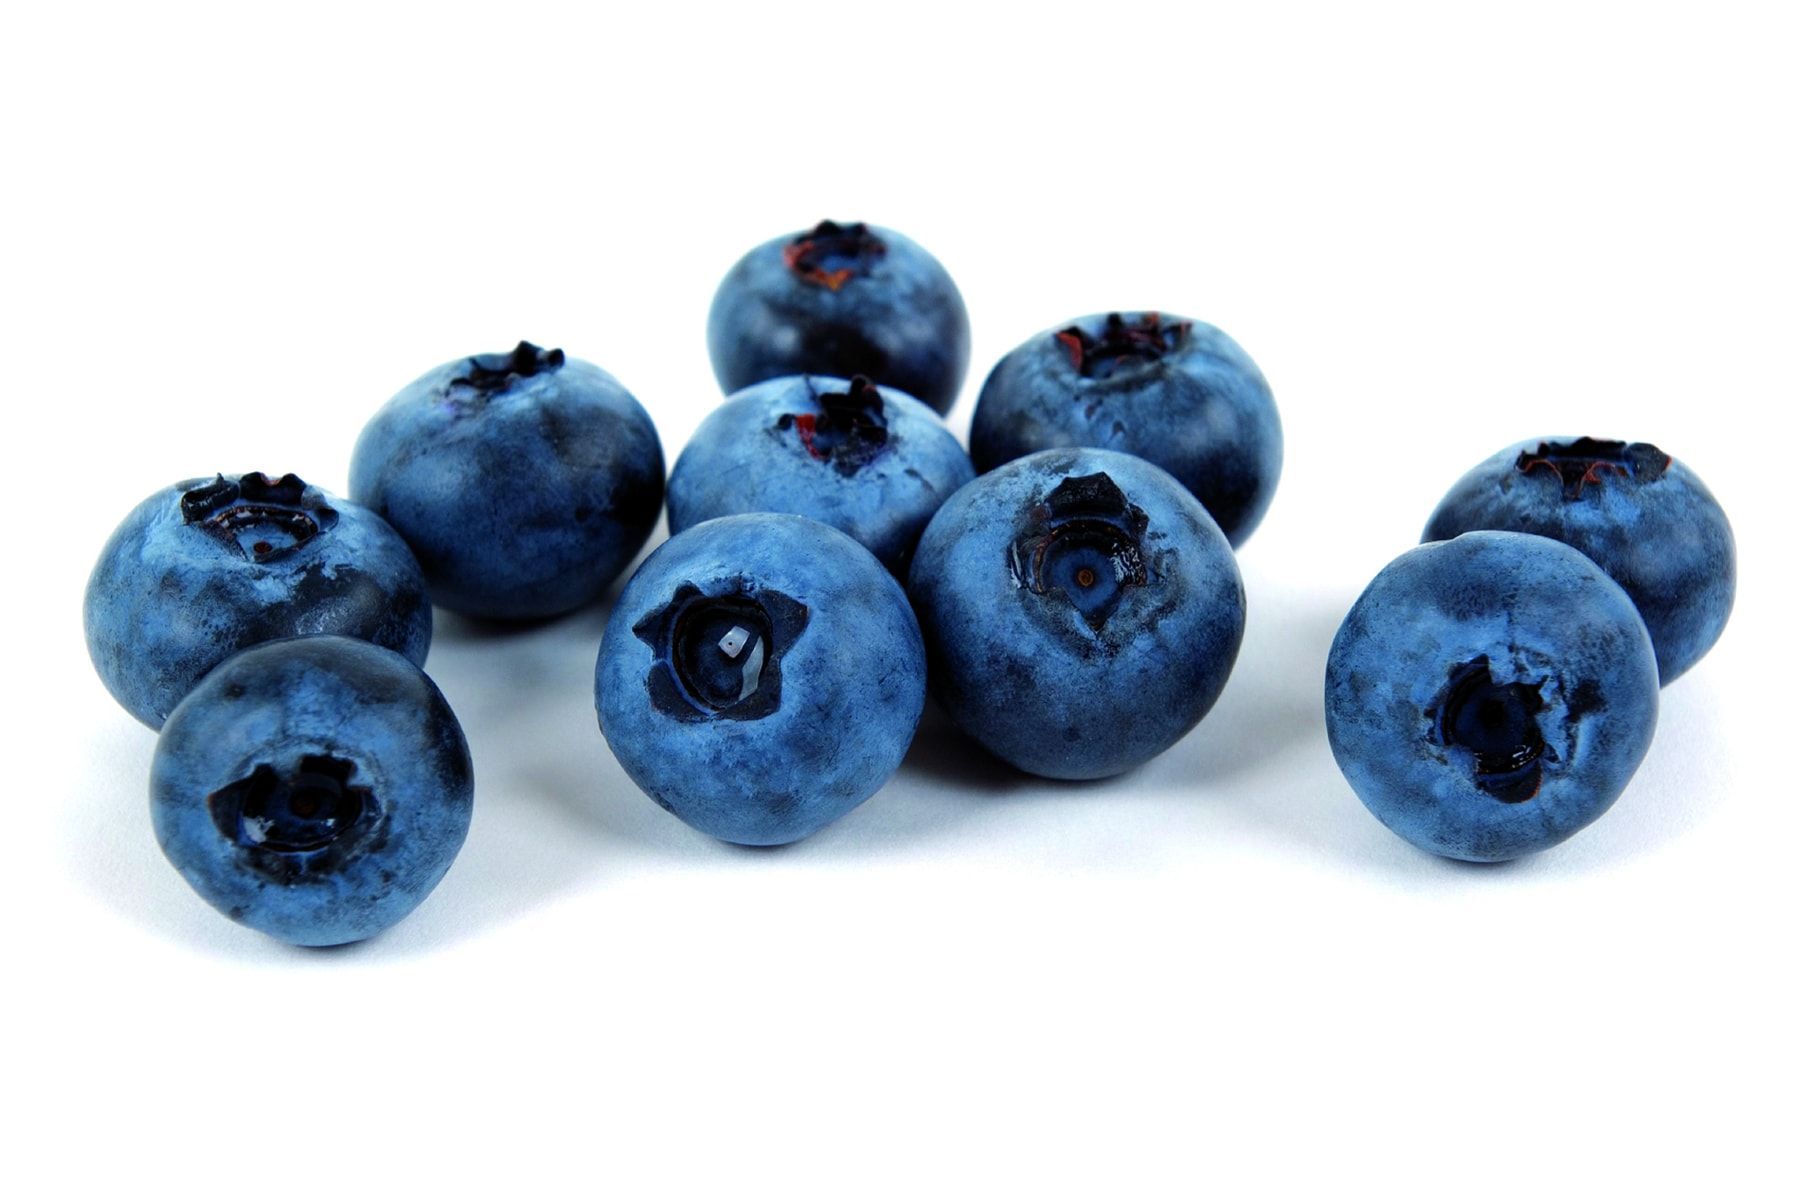 Can Blueberries Turn Your Eyes Blue?